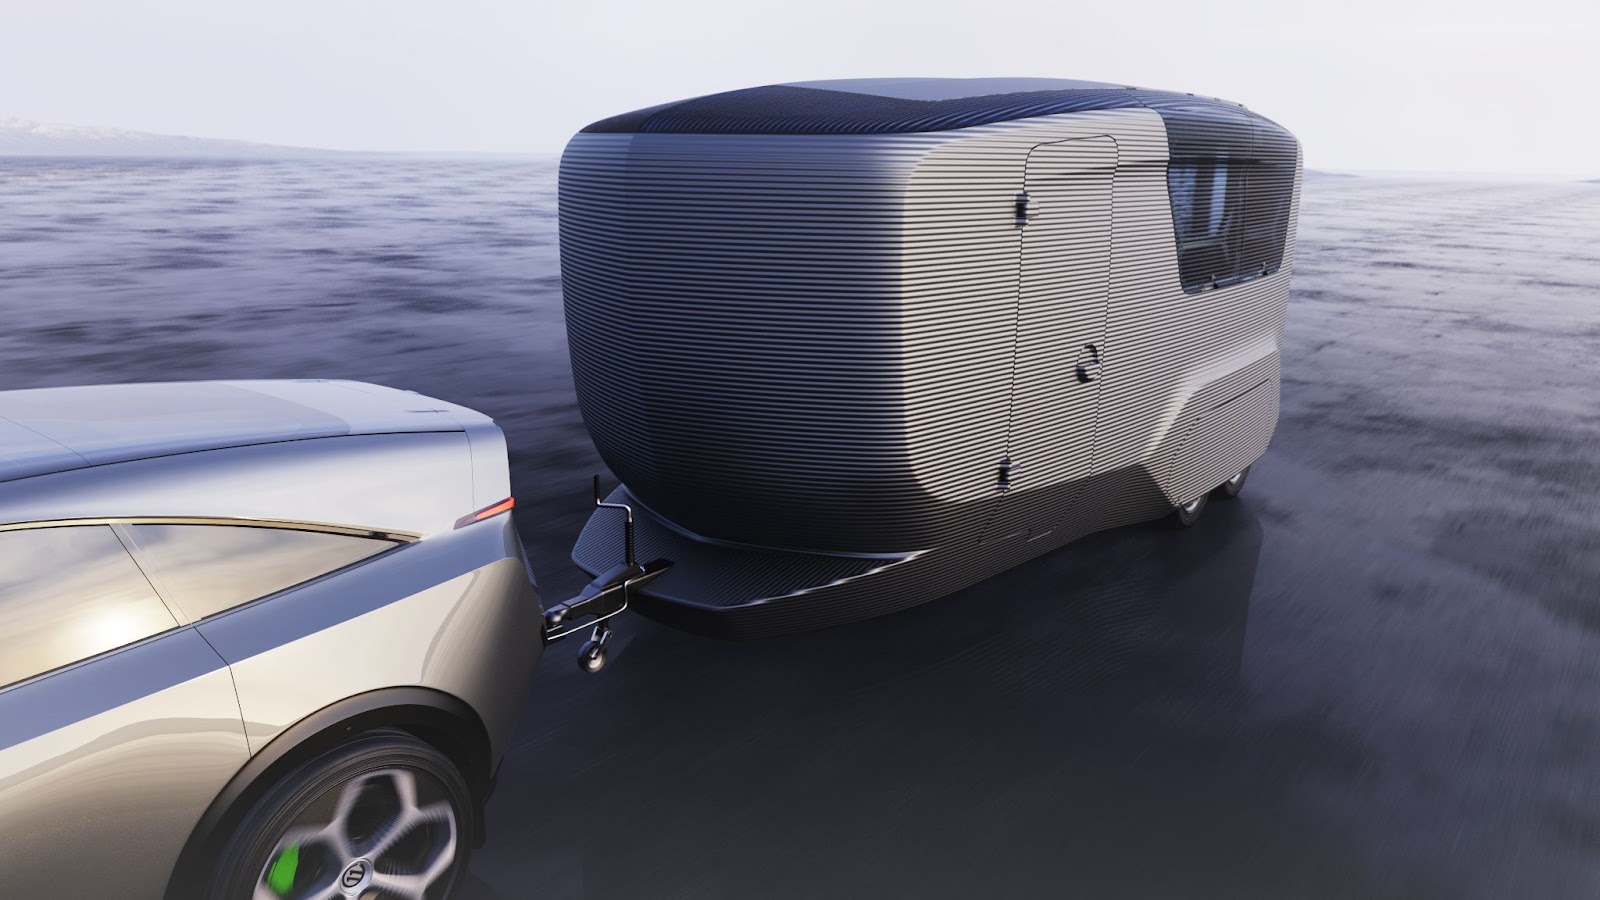 Safe towing demonstrated with the aerodynamic design of Double D Trailers 3D-printed horse trailer